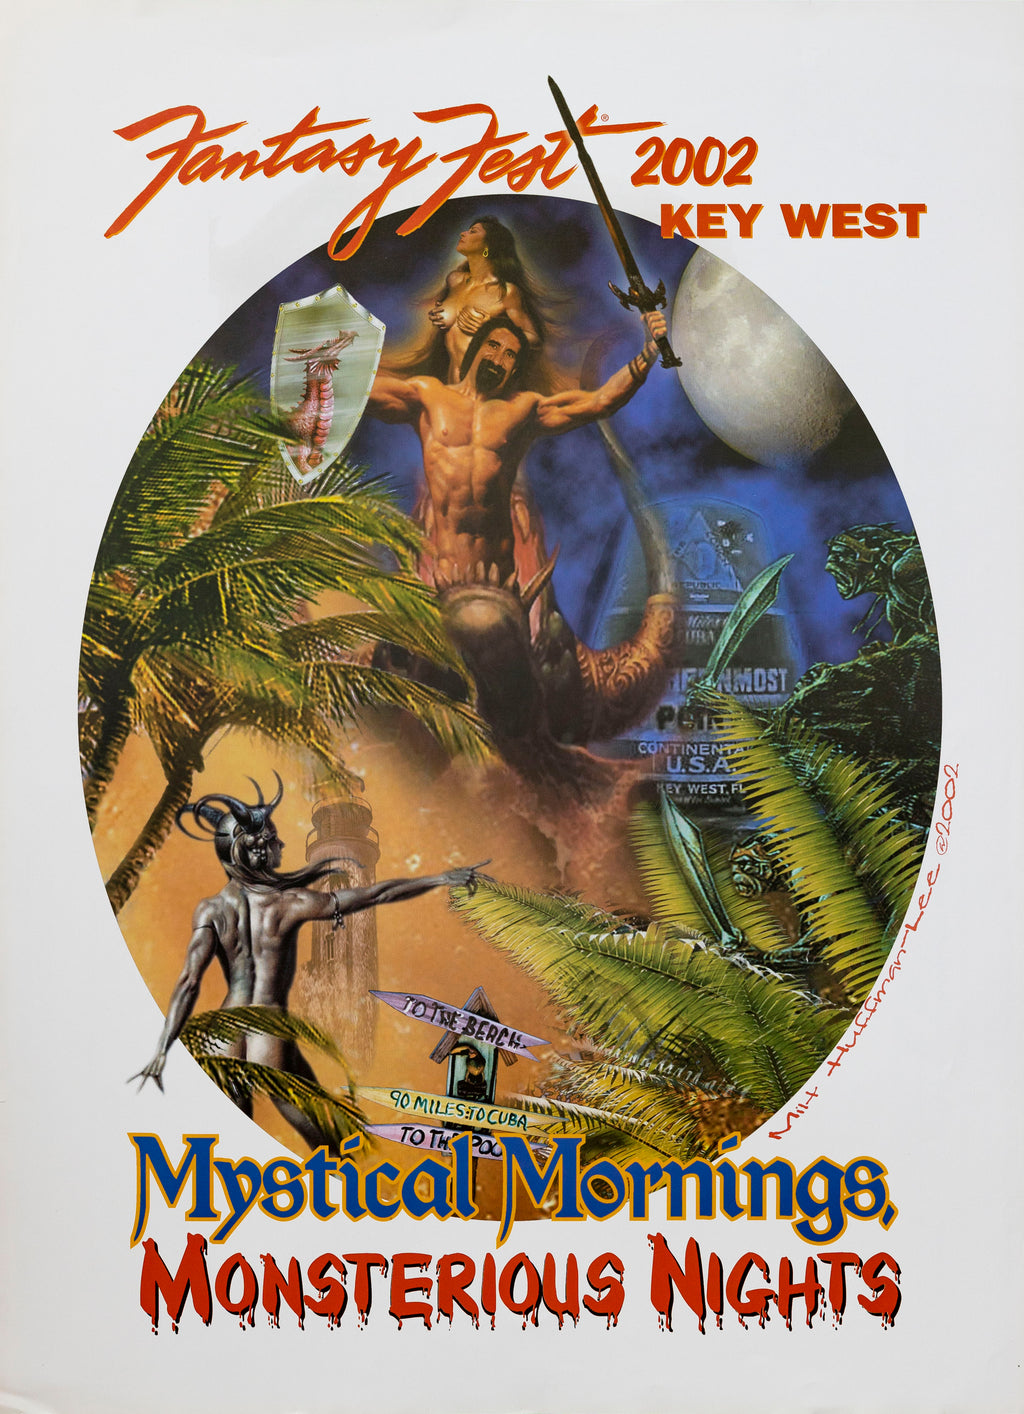 Official 2002 Fantasy Fest Poster Mystical Mornings Monsterious Nights by Milt Huffman-Lee